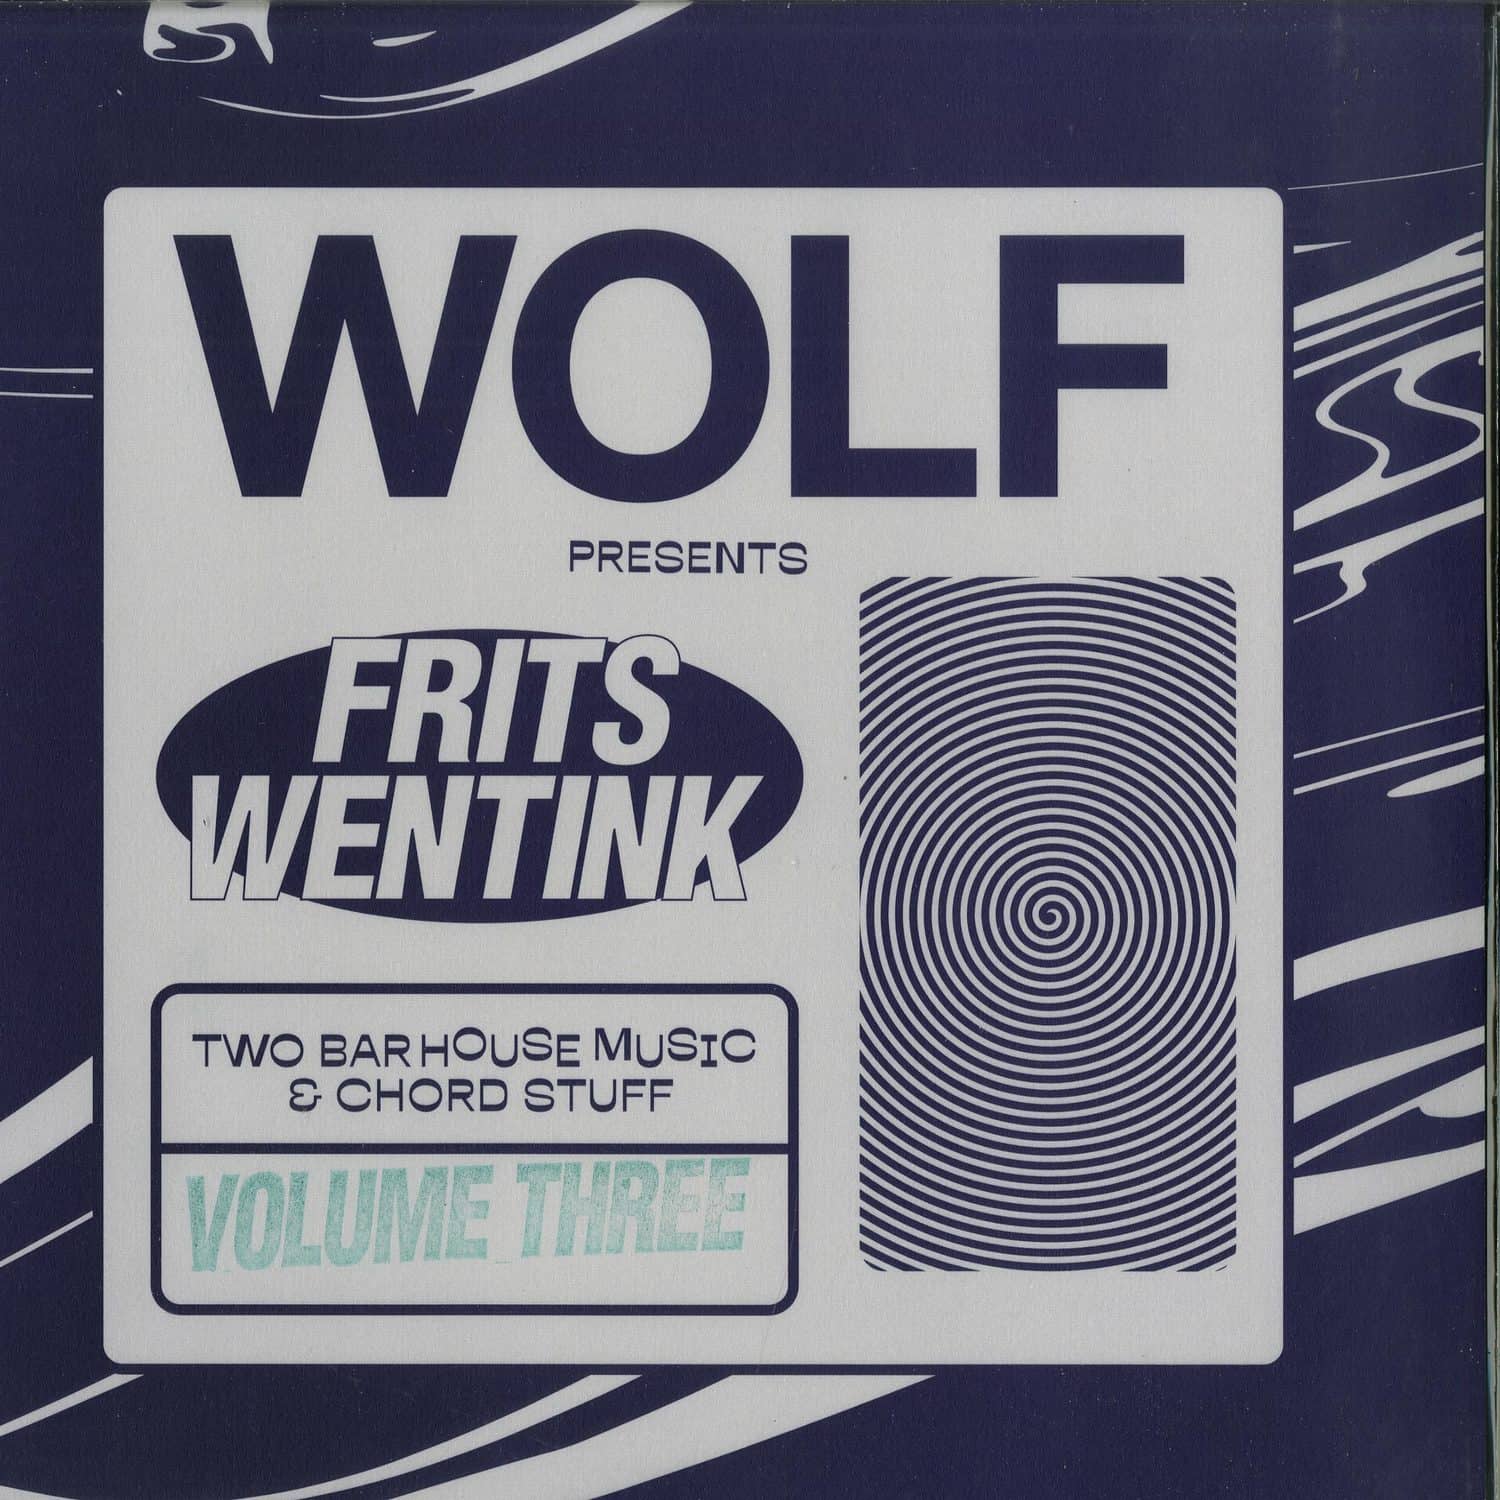 Frits Wentink - TWO BAR HOUSE MUSIC & CHORD STUFF VOL.3